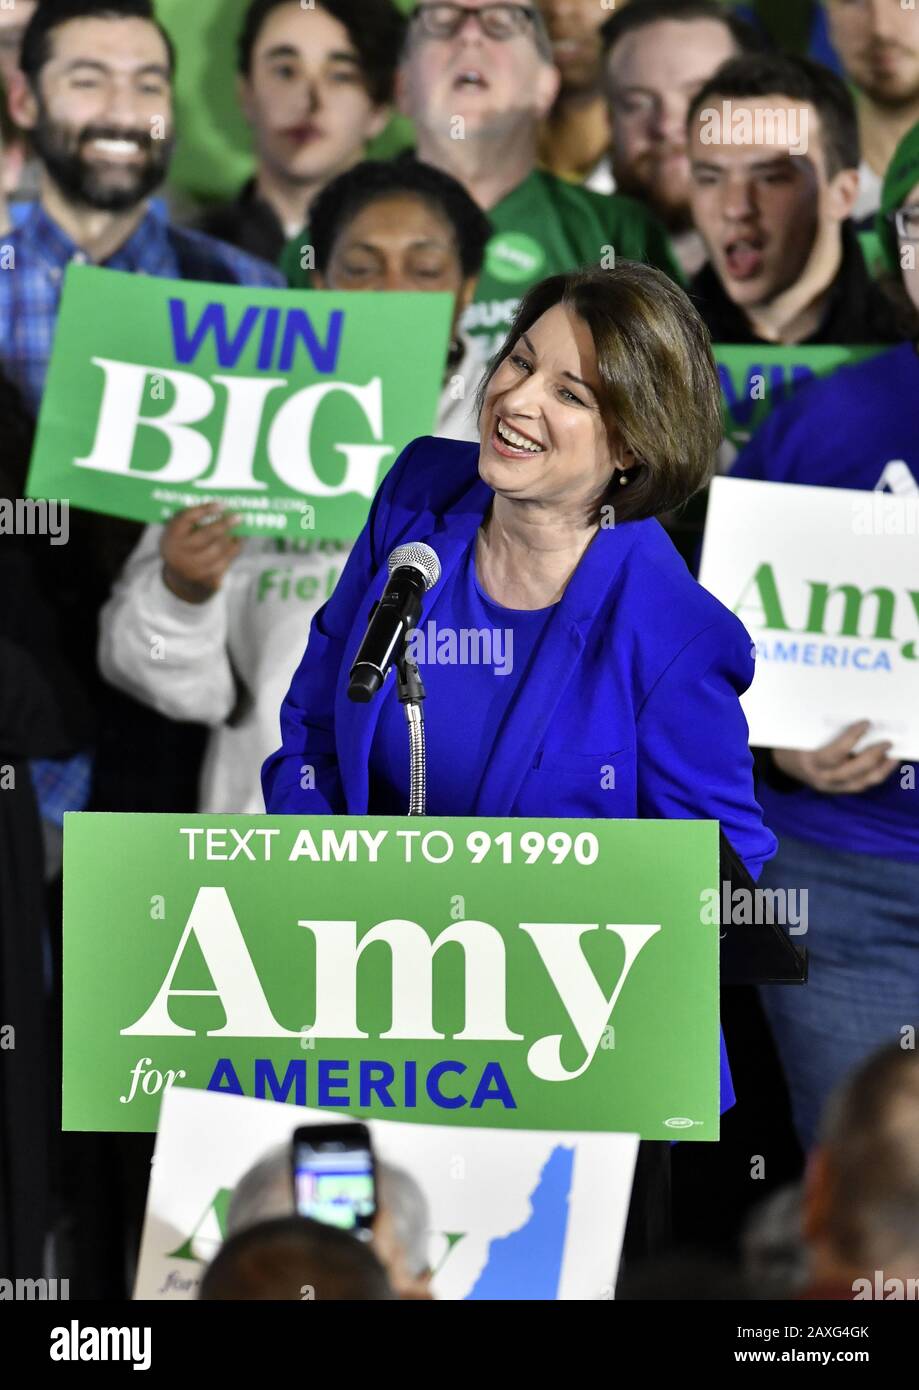 Concord, United States. 11th Feb, 2020. Democratic presidential candidate for 2020 and Minnesota Sen. Amy Klobuchar greets the crowd during a New Hampshire 2020 presidential primary night event at the Grappone Center in Concord, New Hampshire on Tuesday, February 11, 2020. Klobuchar appeared to be on the way to a third place finish in the first in the nation presidential primary. Photo by Joshua Reynolds/UPI Credit: UPI/Alamy Live News Stock Photo